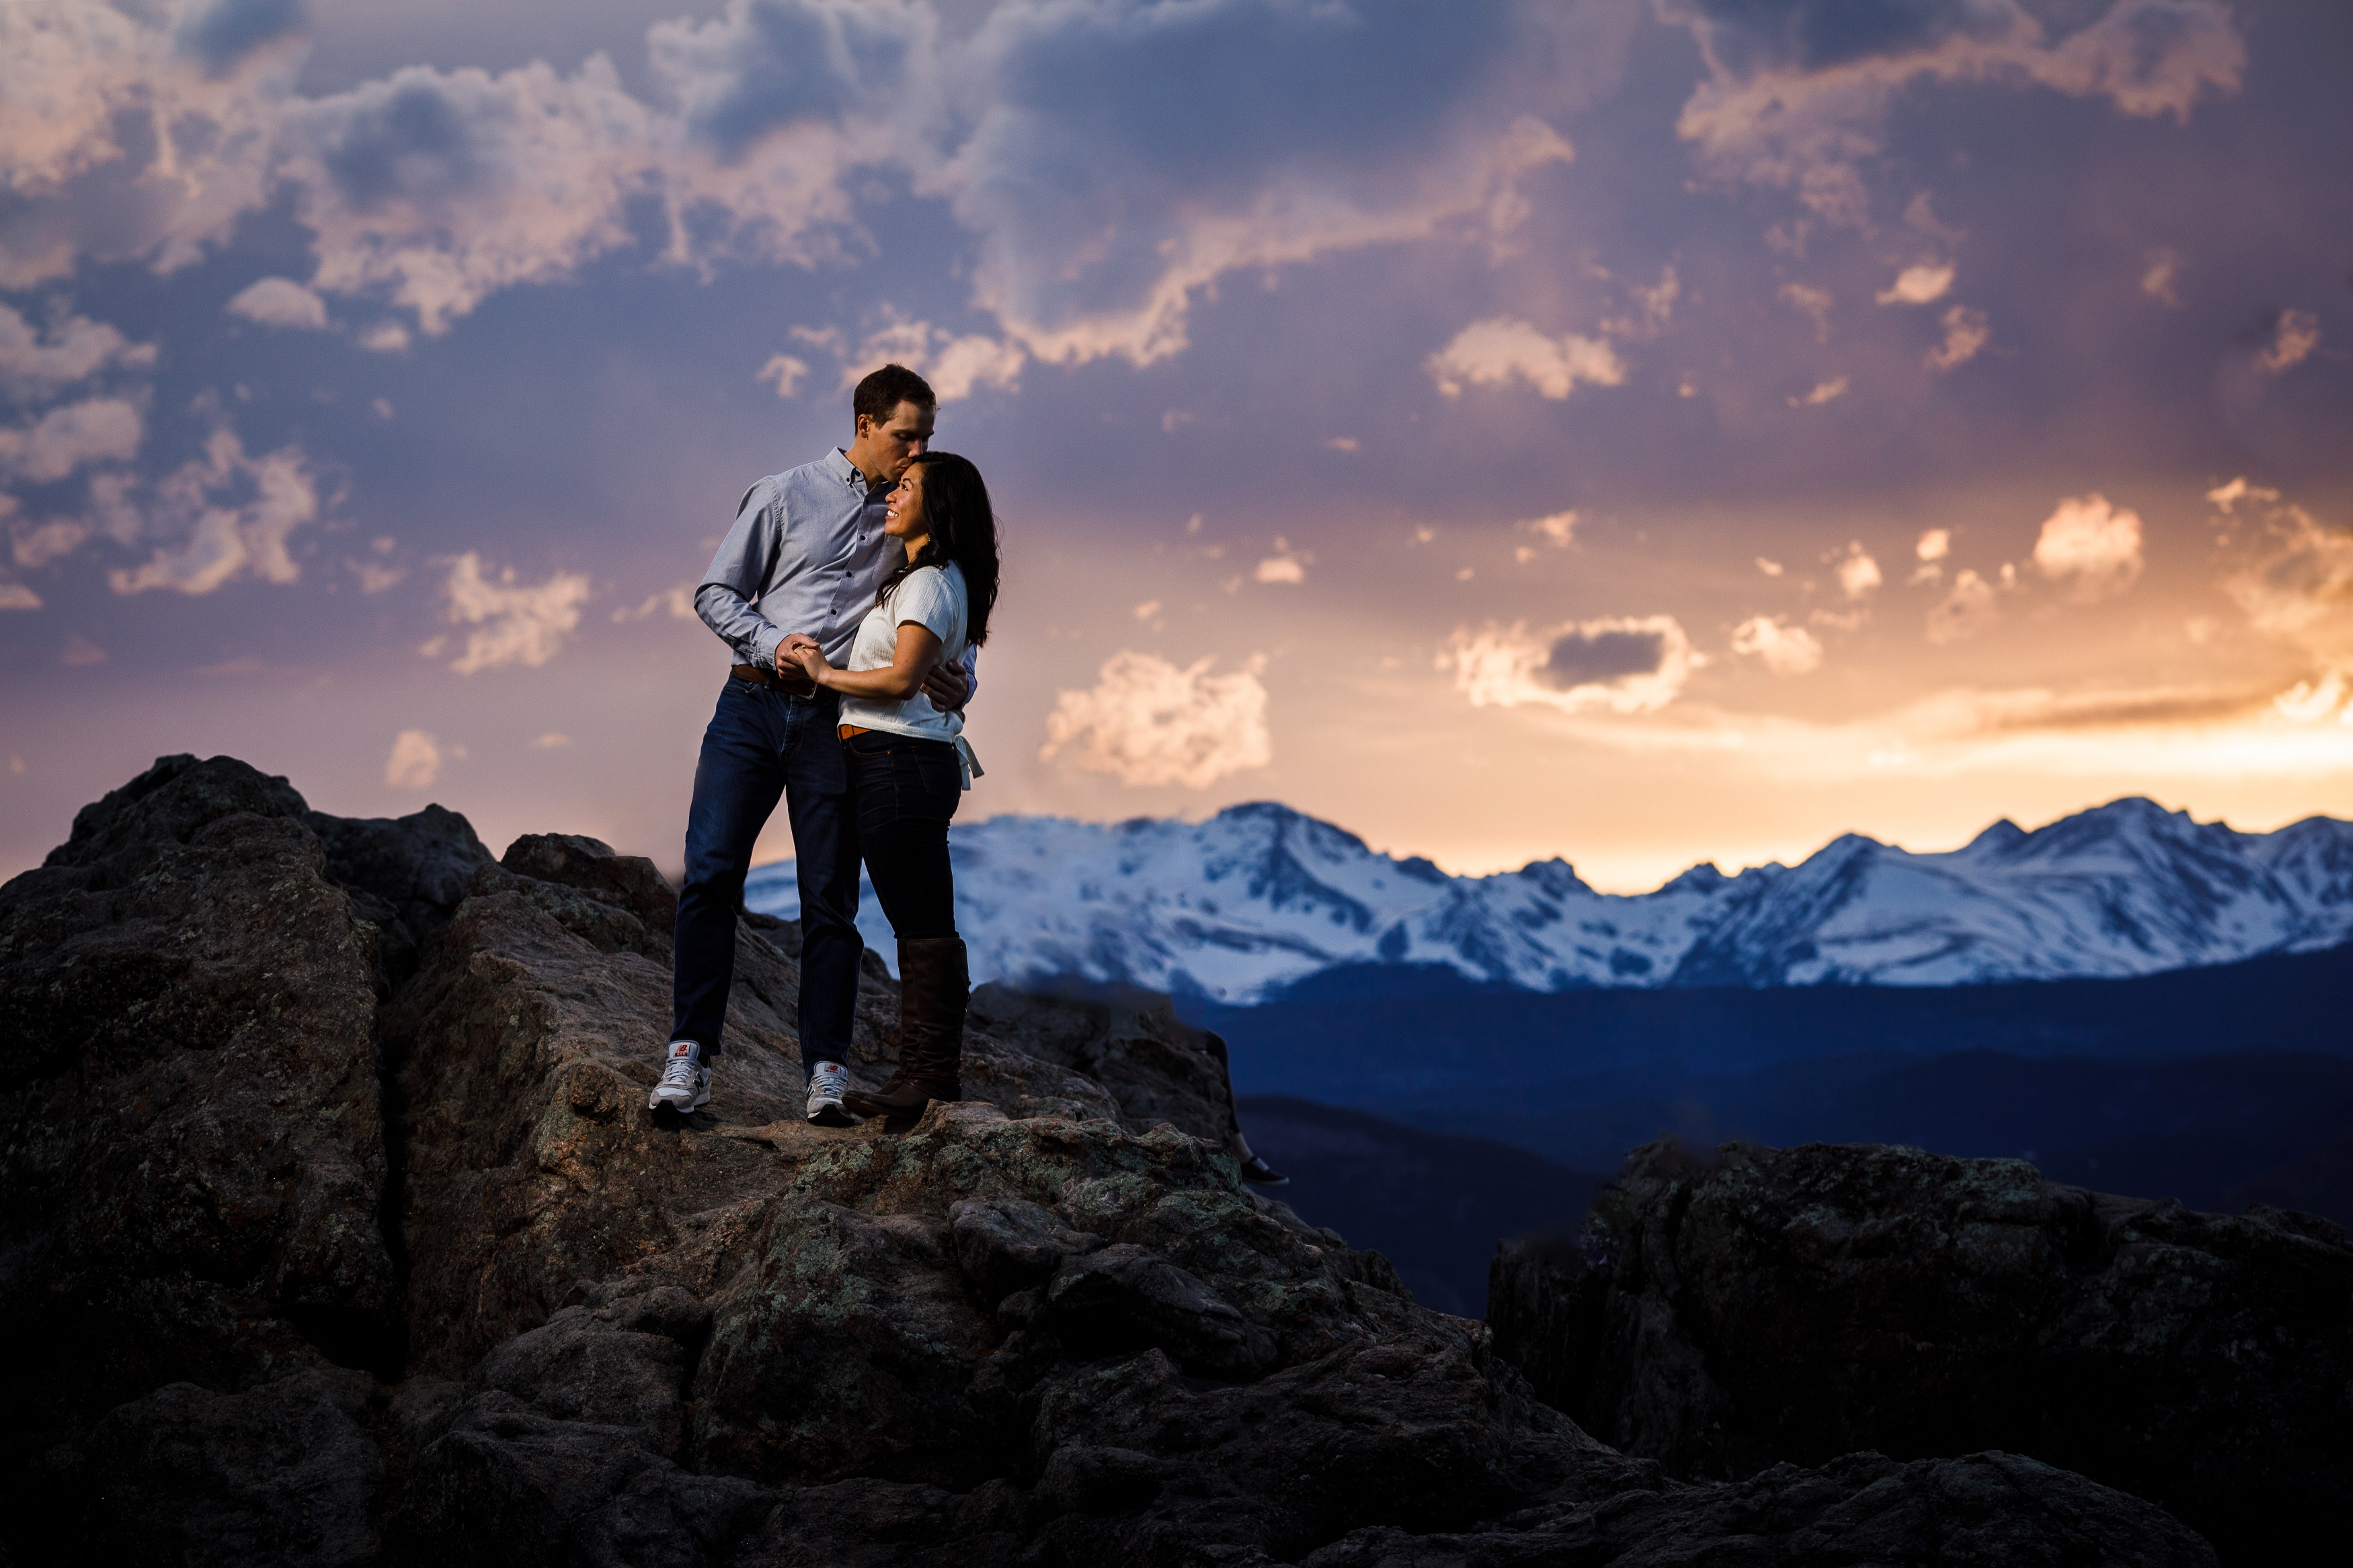 Lost Gulch Overlook Engagement Photo at Sunset